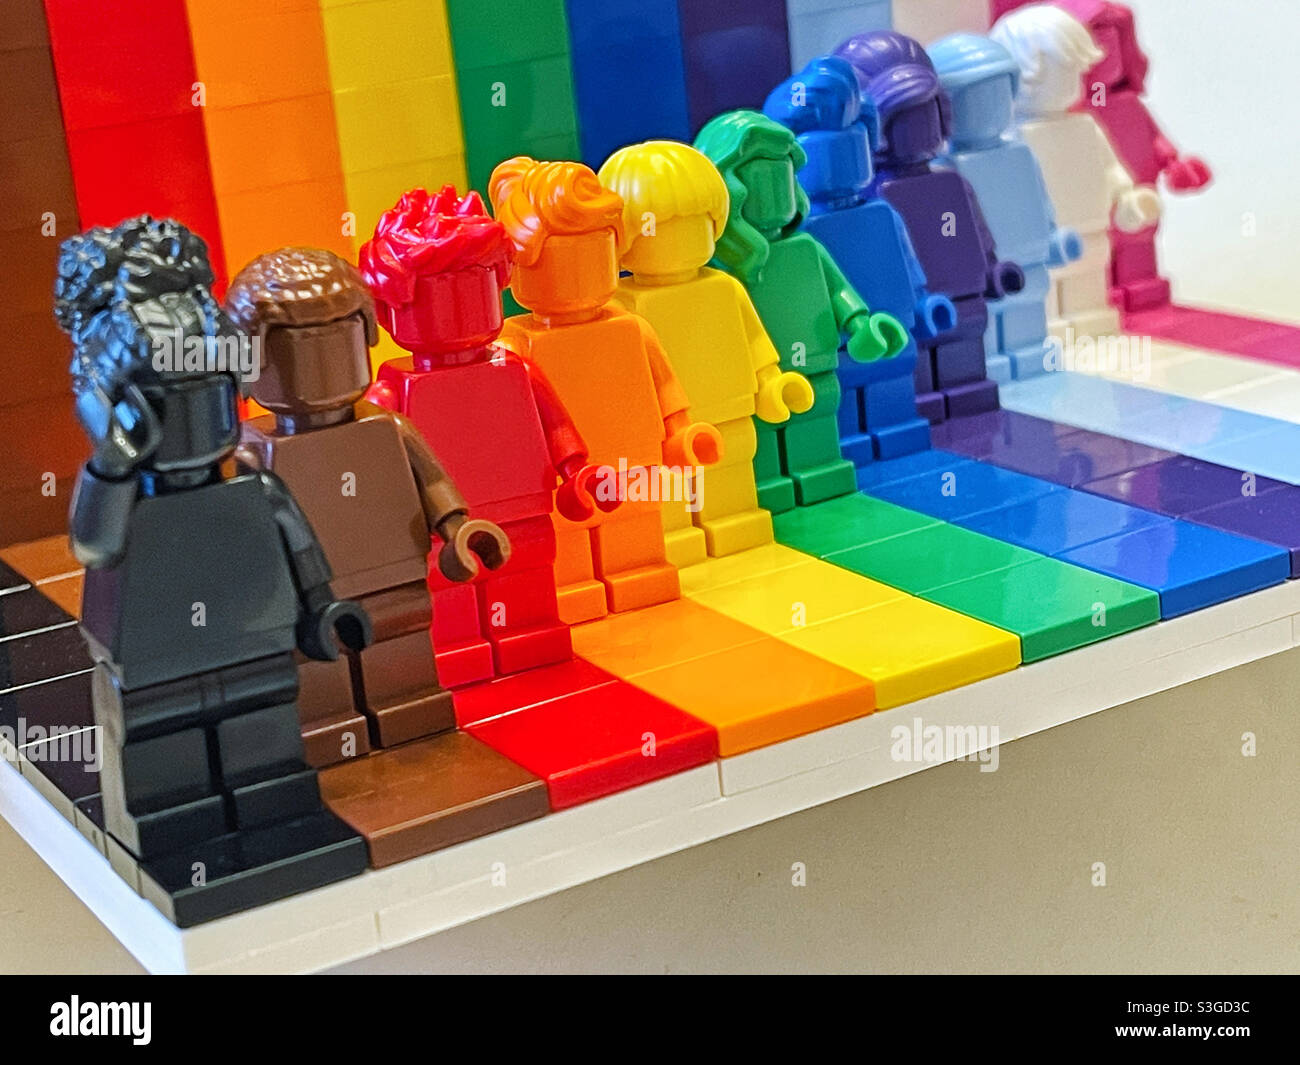 inflation Veluddannet aflivning Special Lego set Everyone is Awesome with rainbow colored figurines Stock  Photo - Alamy